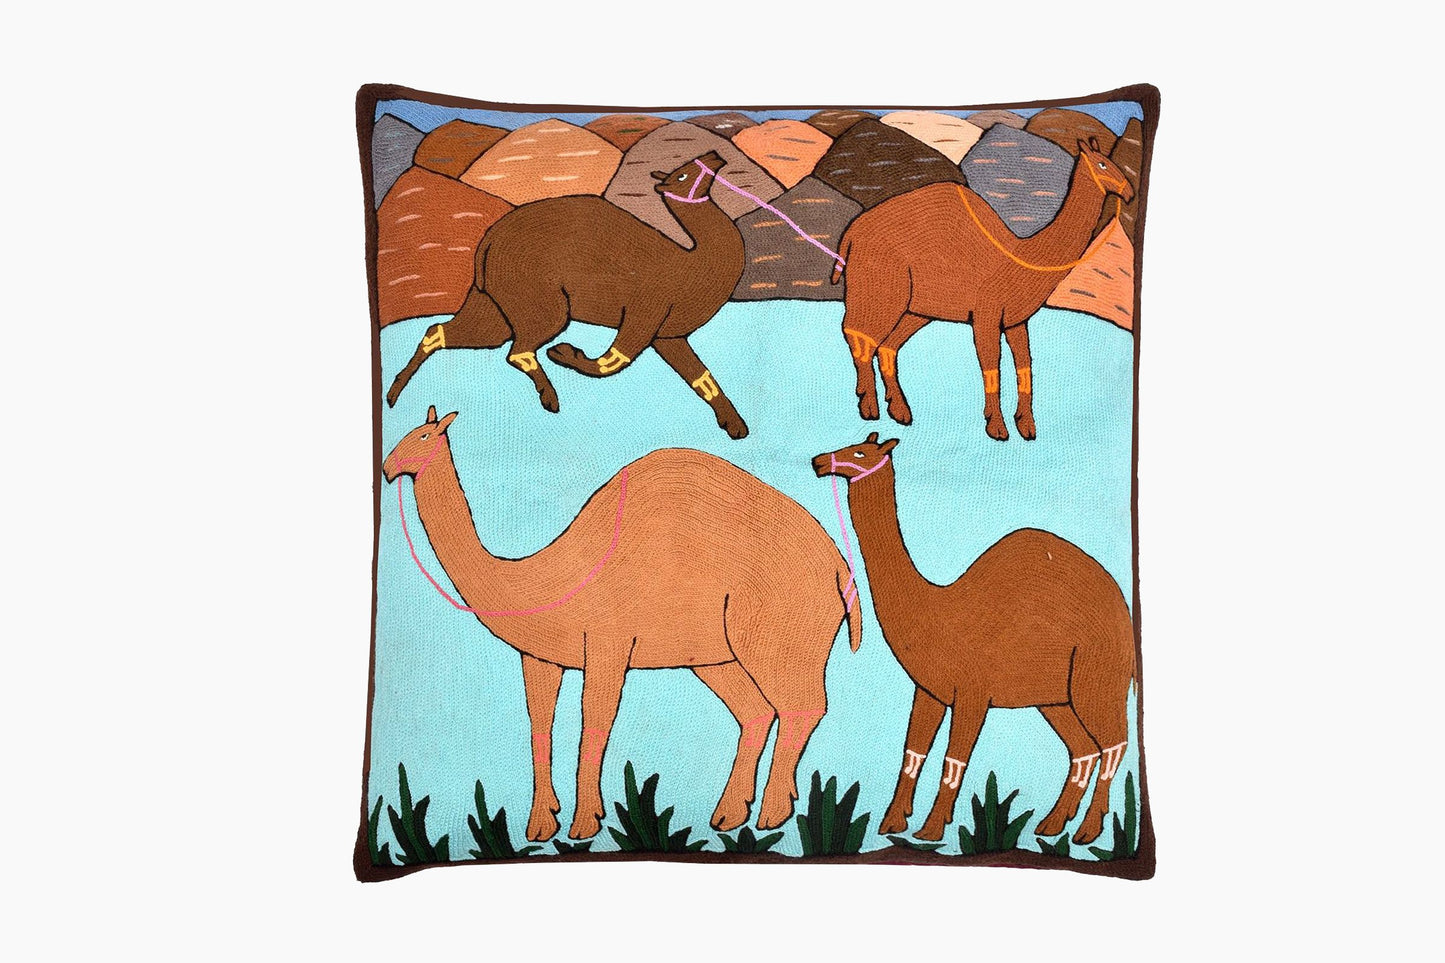 A COLOURFUL FLOOR CUSHION EMBROIDERED WITH CAMELS